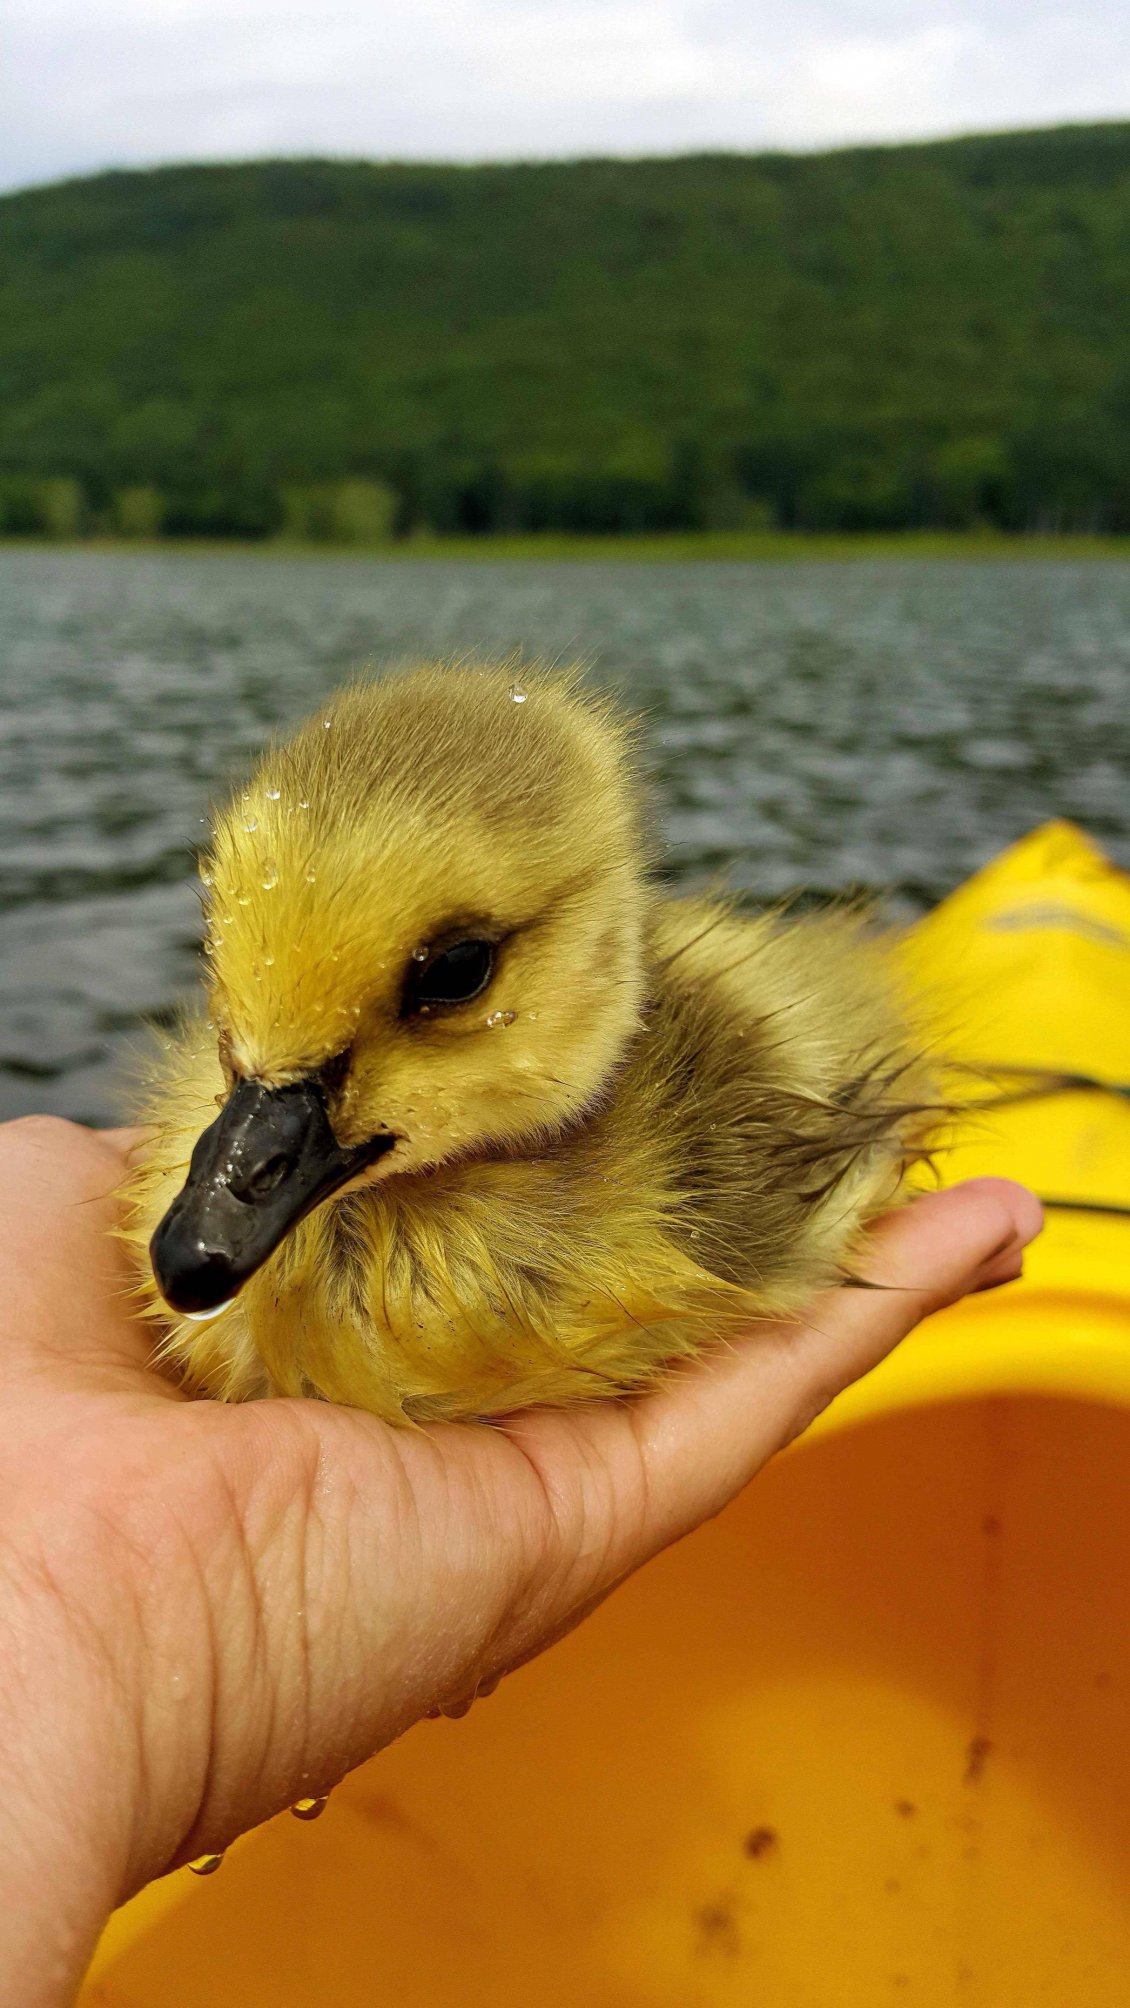 Download Wallpaper One little wet gosling on the hand